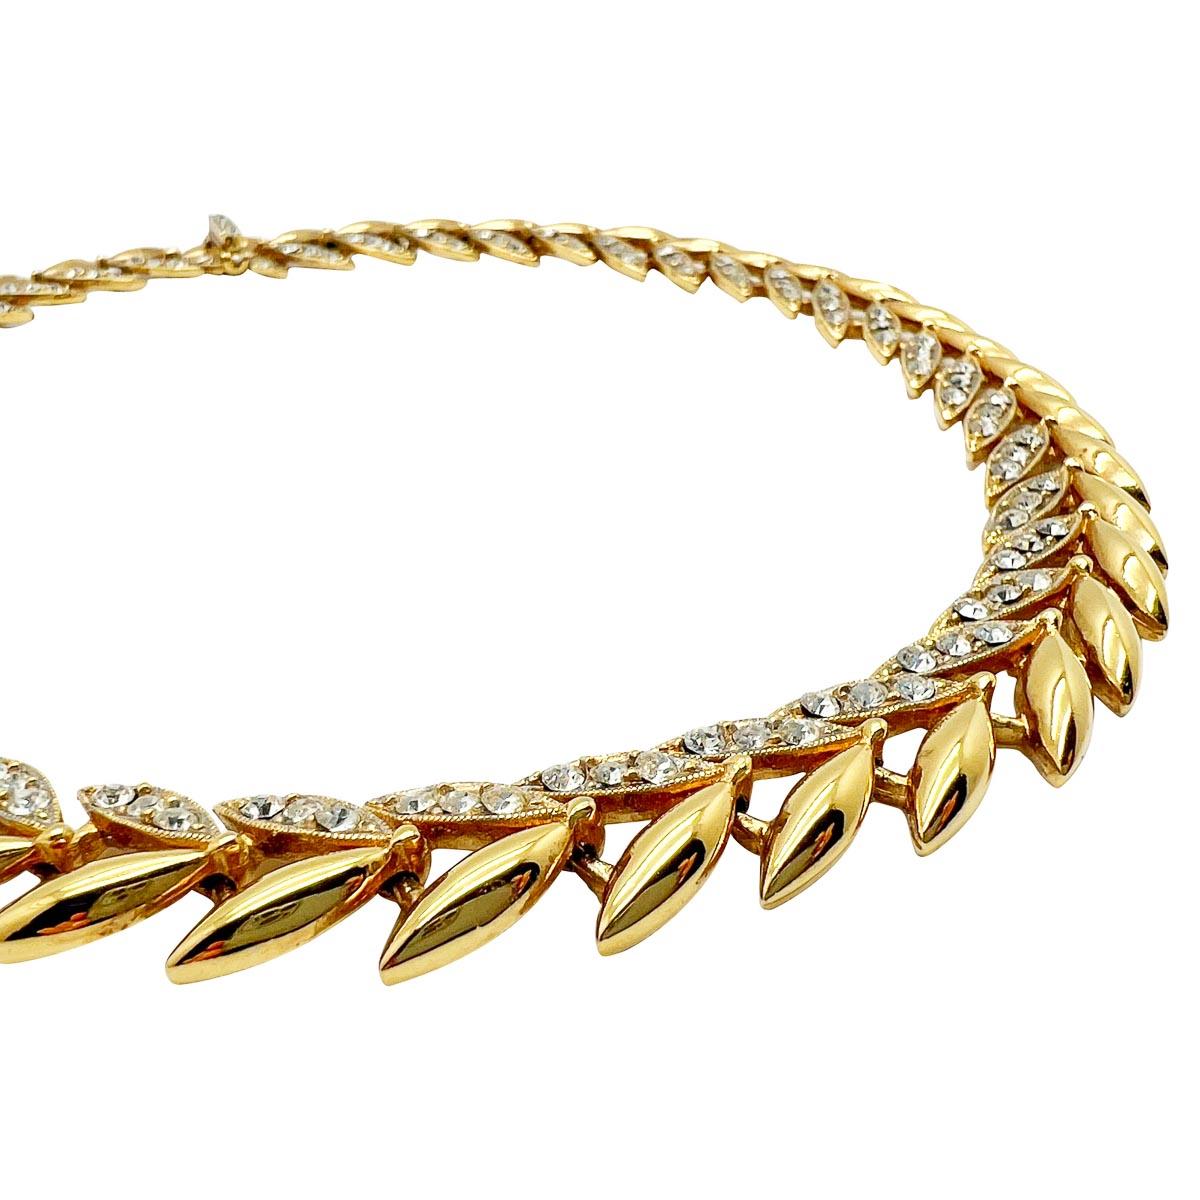 A vintage crystal leaf collar by London costume jewellers, SARDI. A stylised golden design embellished with crystals offers contemporary style with a glistening touch.
Your jewel box staple is just a moment away as are many wonderful wears as this